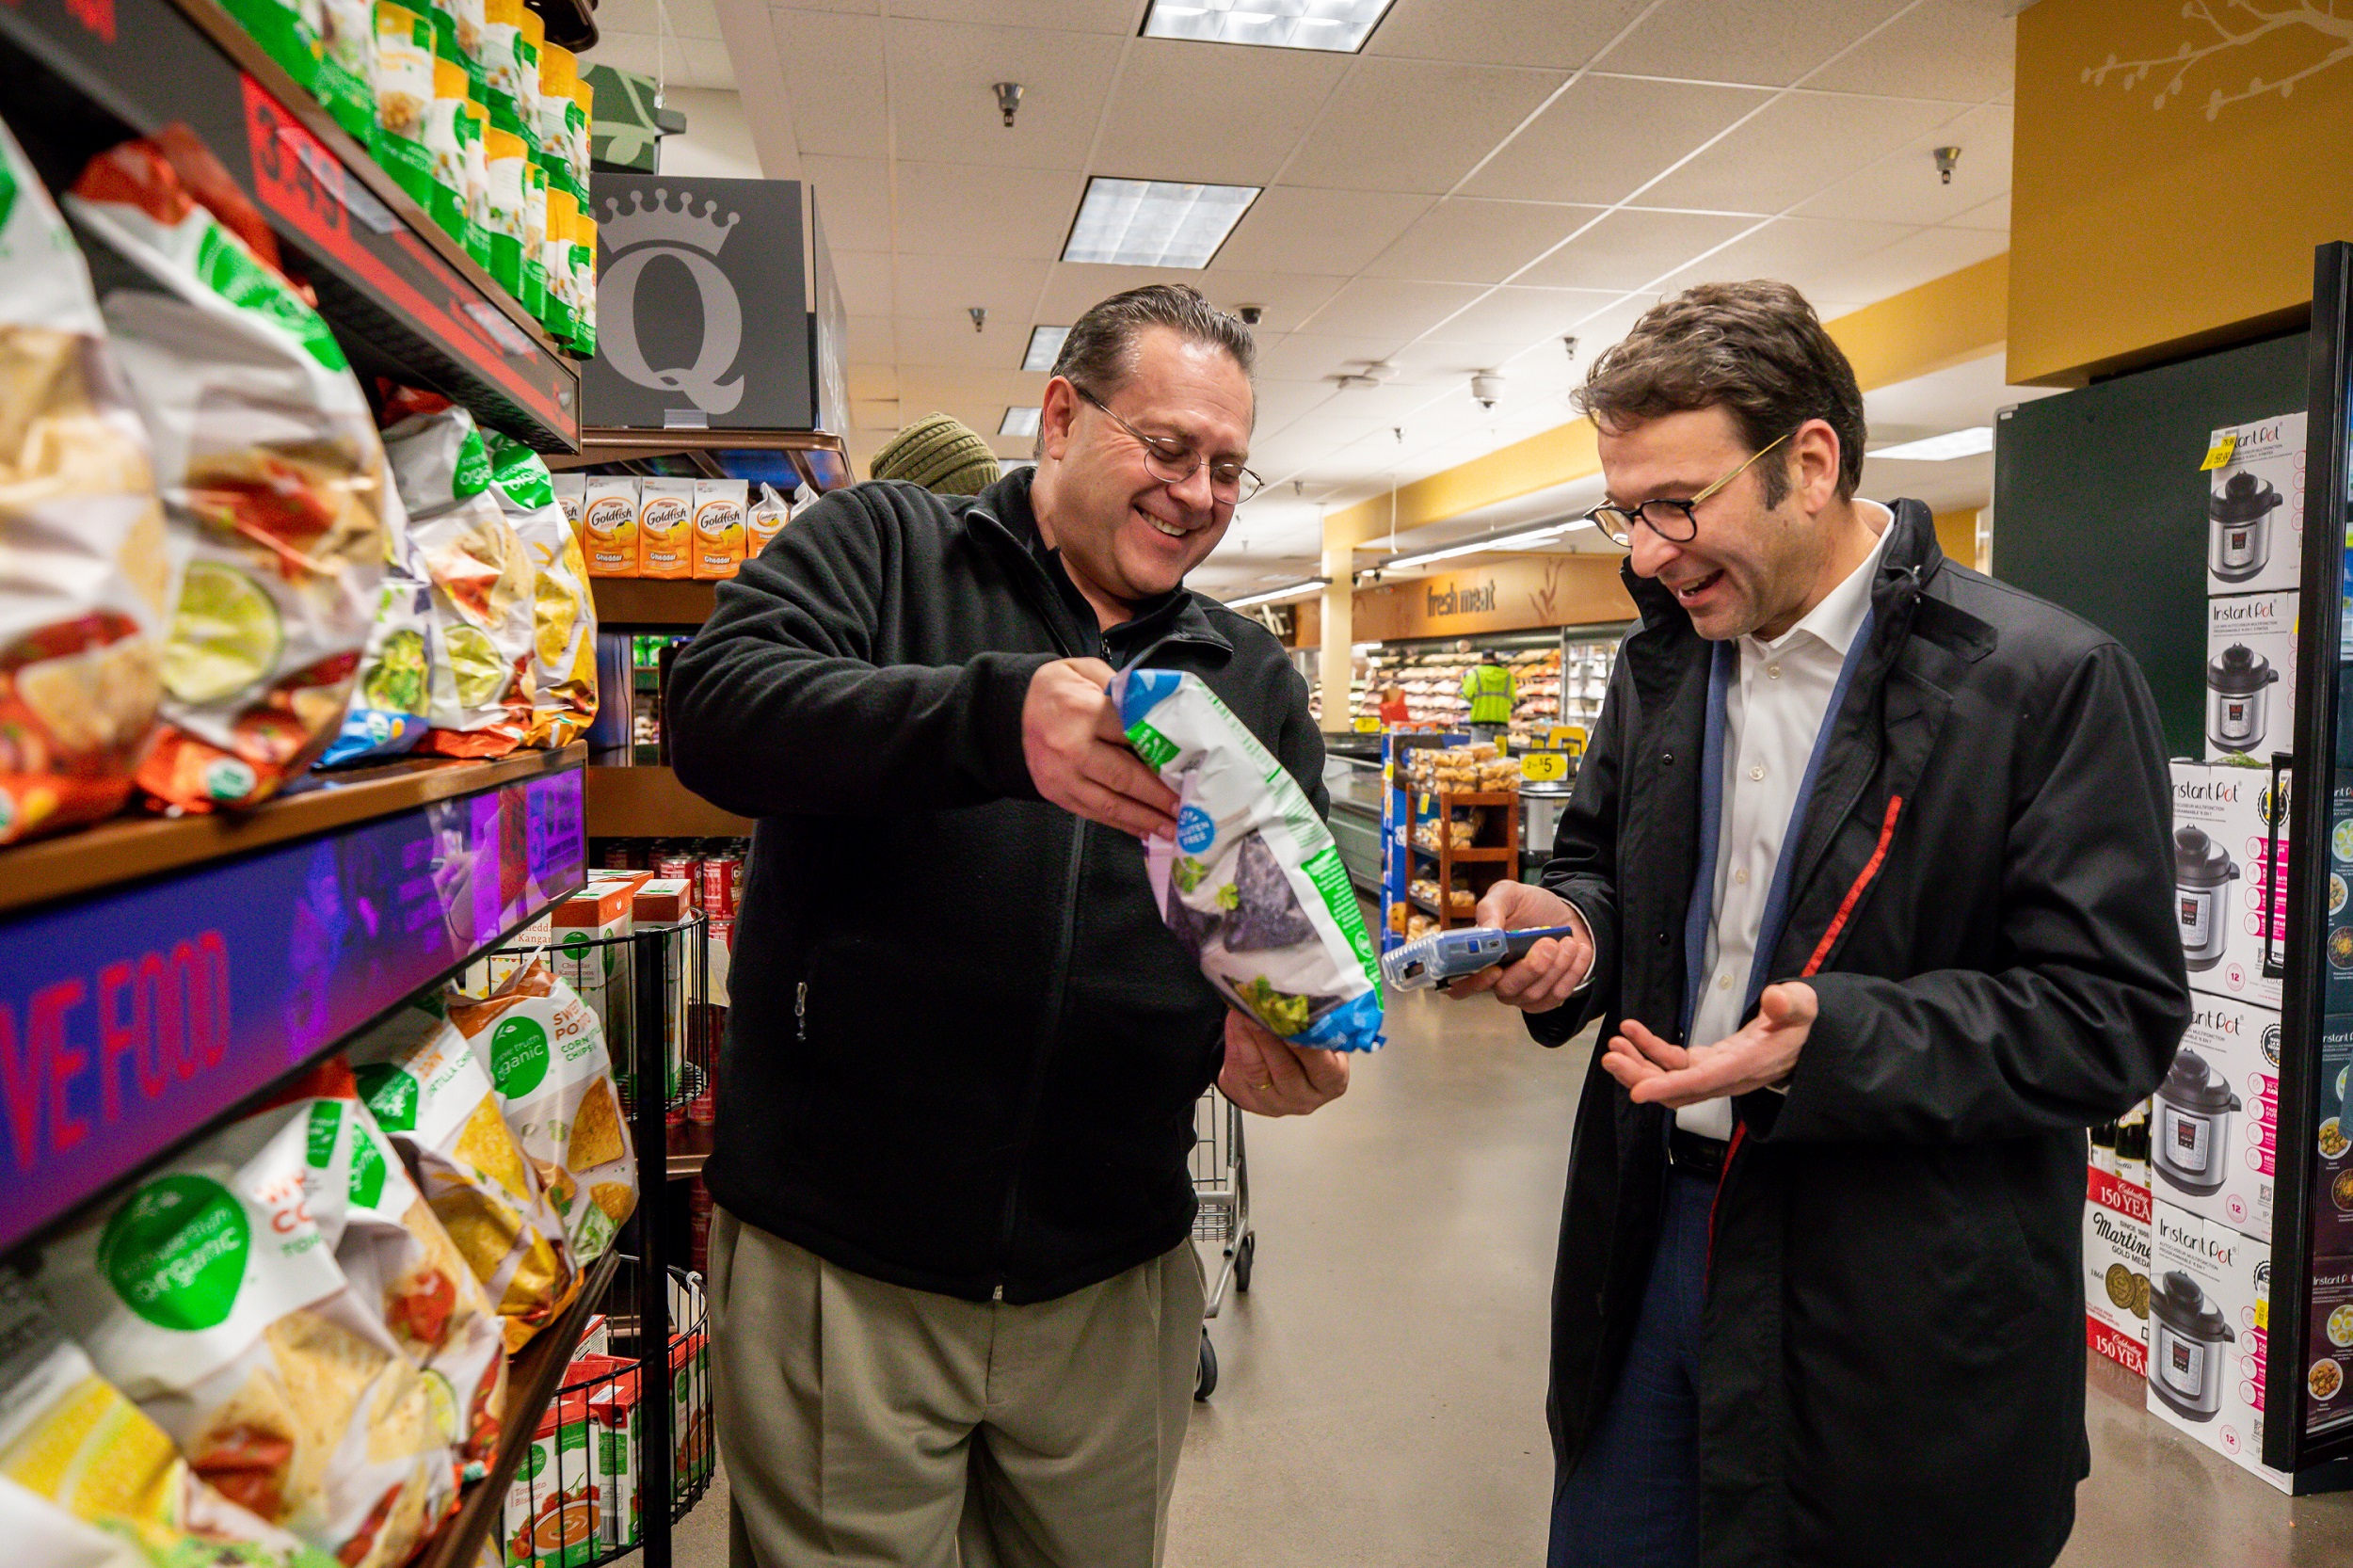 One man holds a bag of chips inside a store while a second man aims a pricing scanner at the bag.